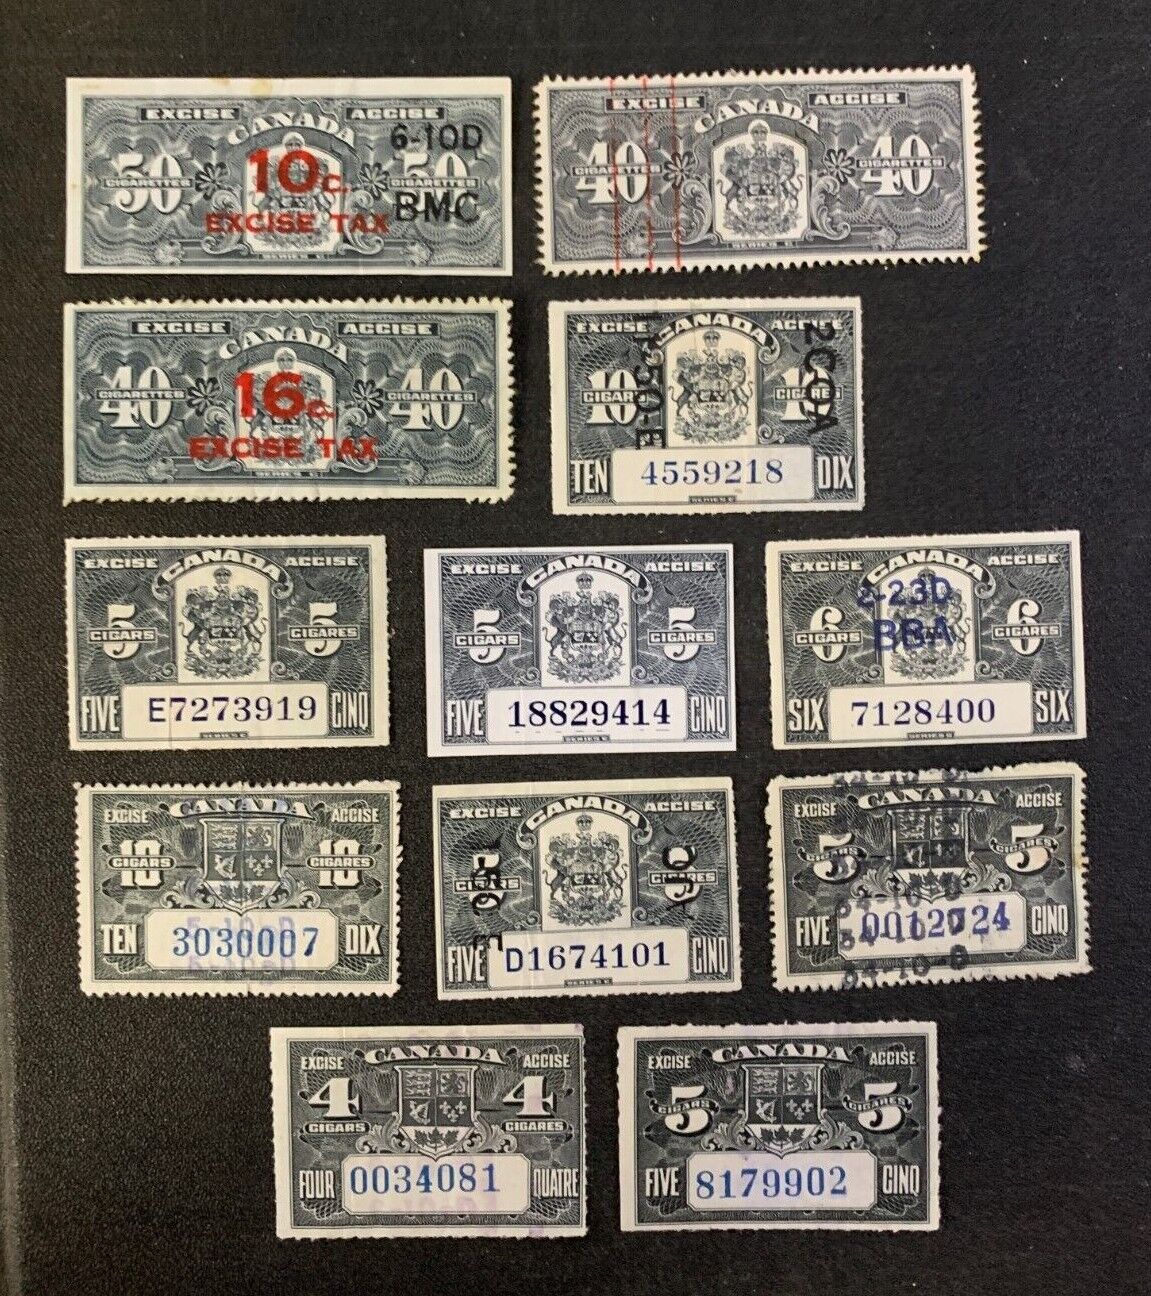 Canada Tobacco Stamps Used With Some Condition Issues